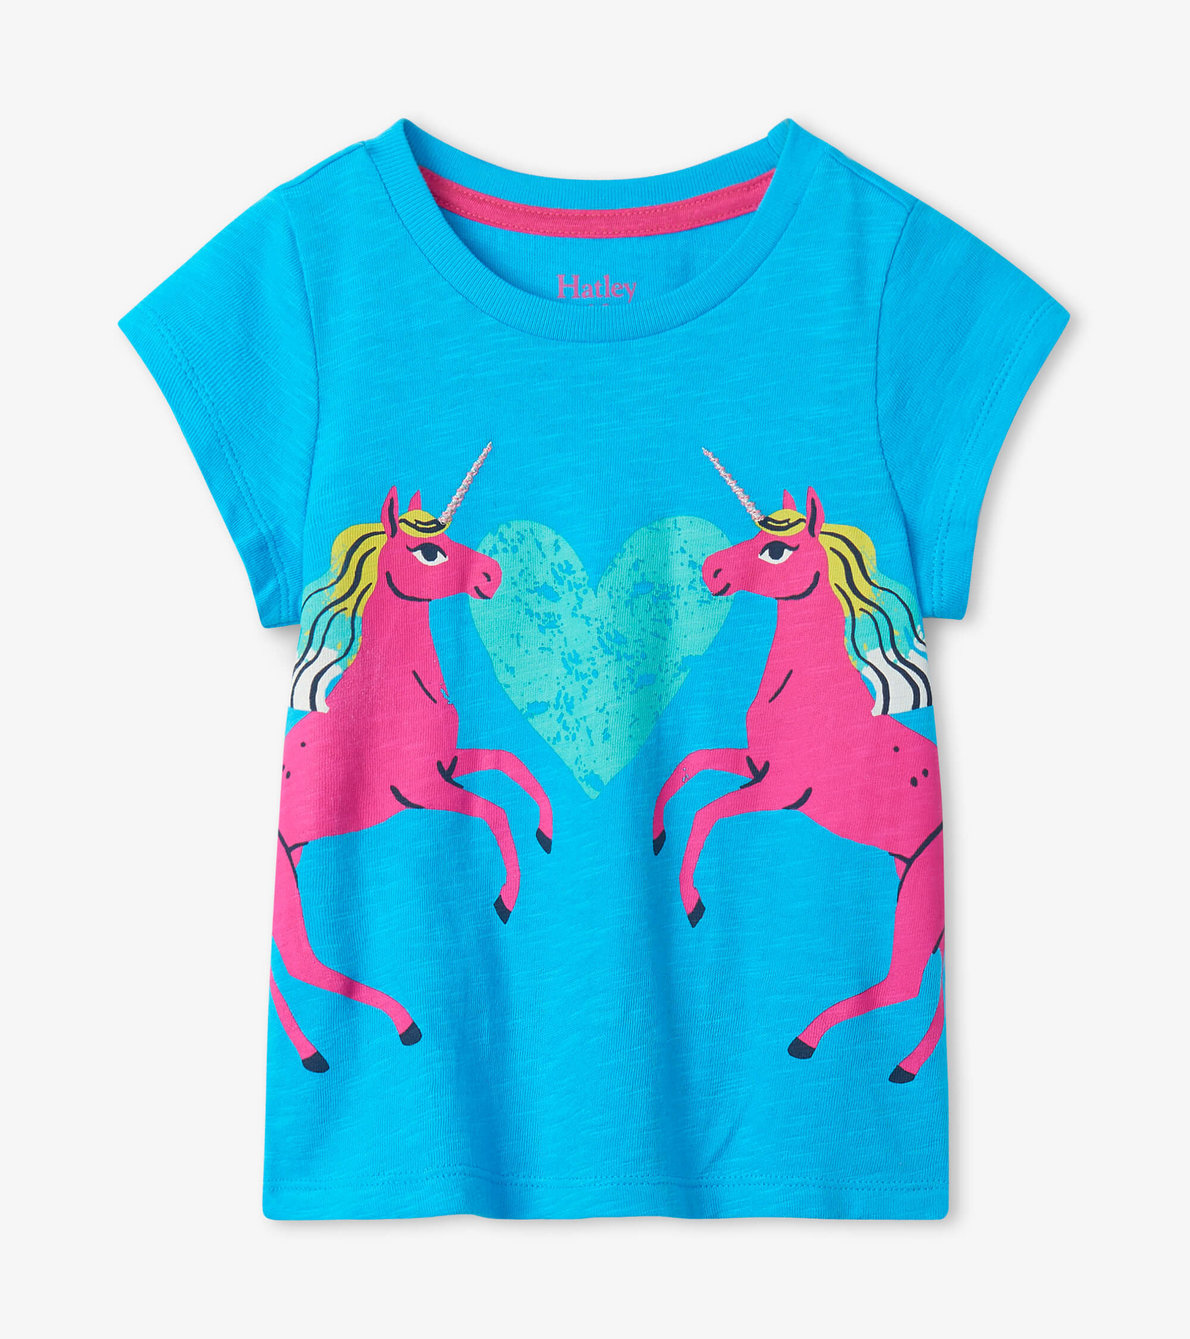 View larger image of Magical Unicorns Graphic Tee